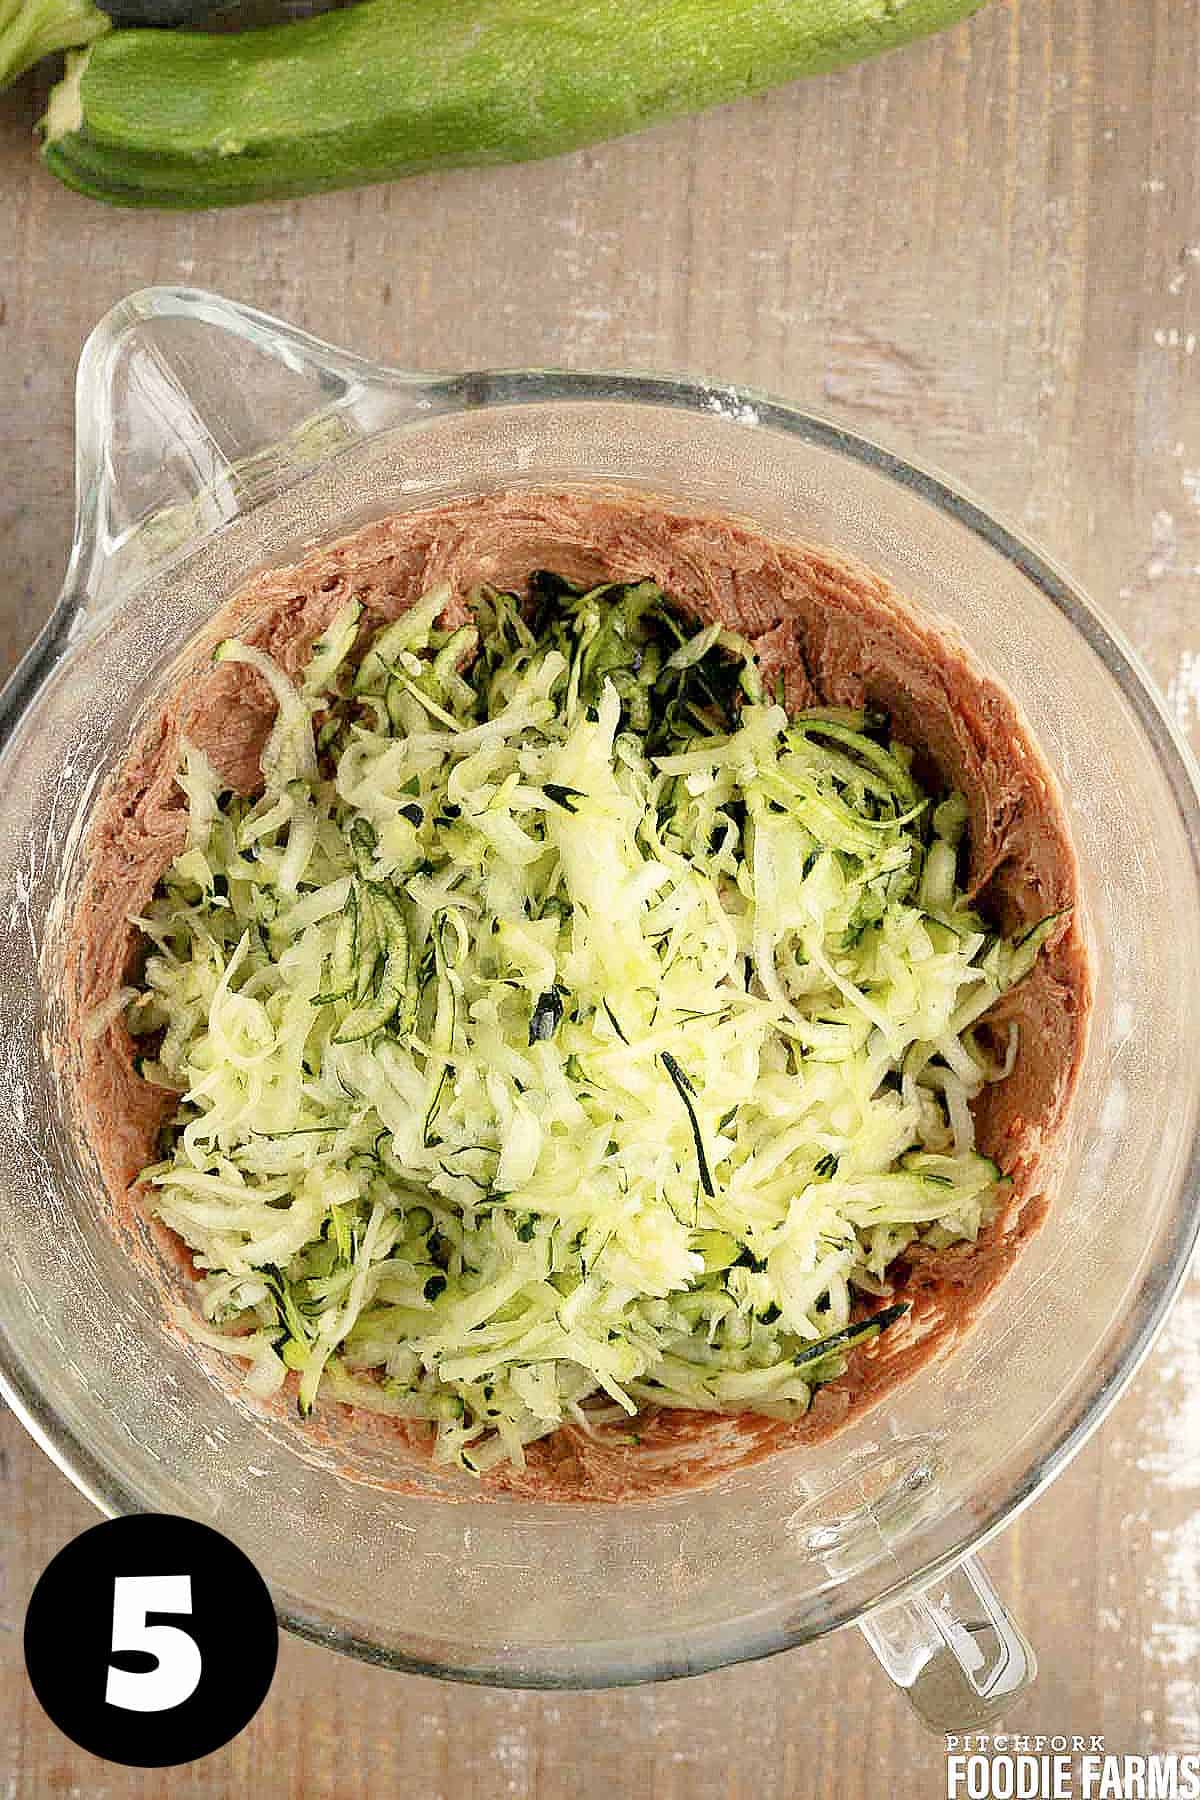 Chocolate cake batter with grated zucchini in a glass mixing bowl.